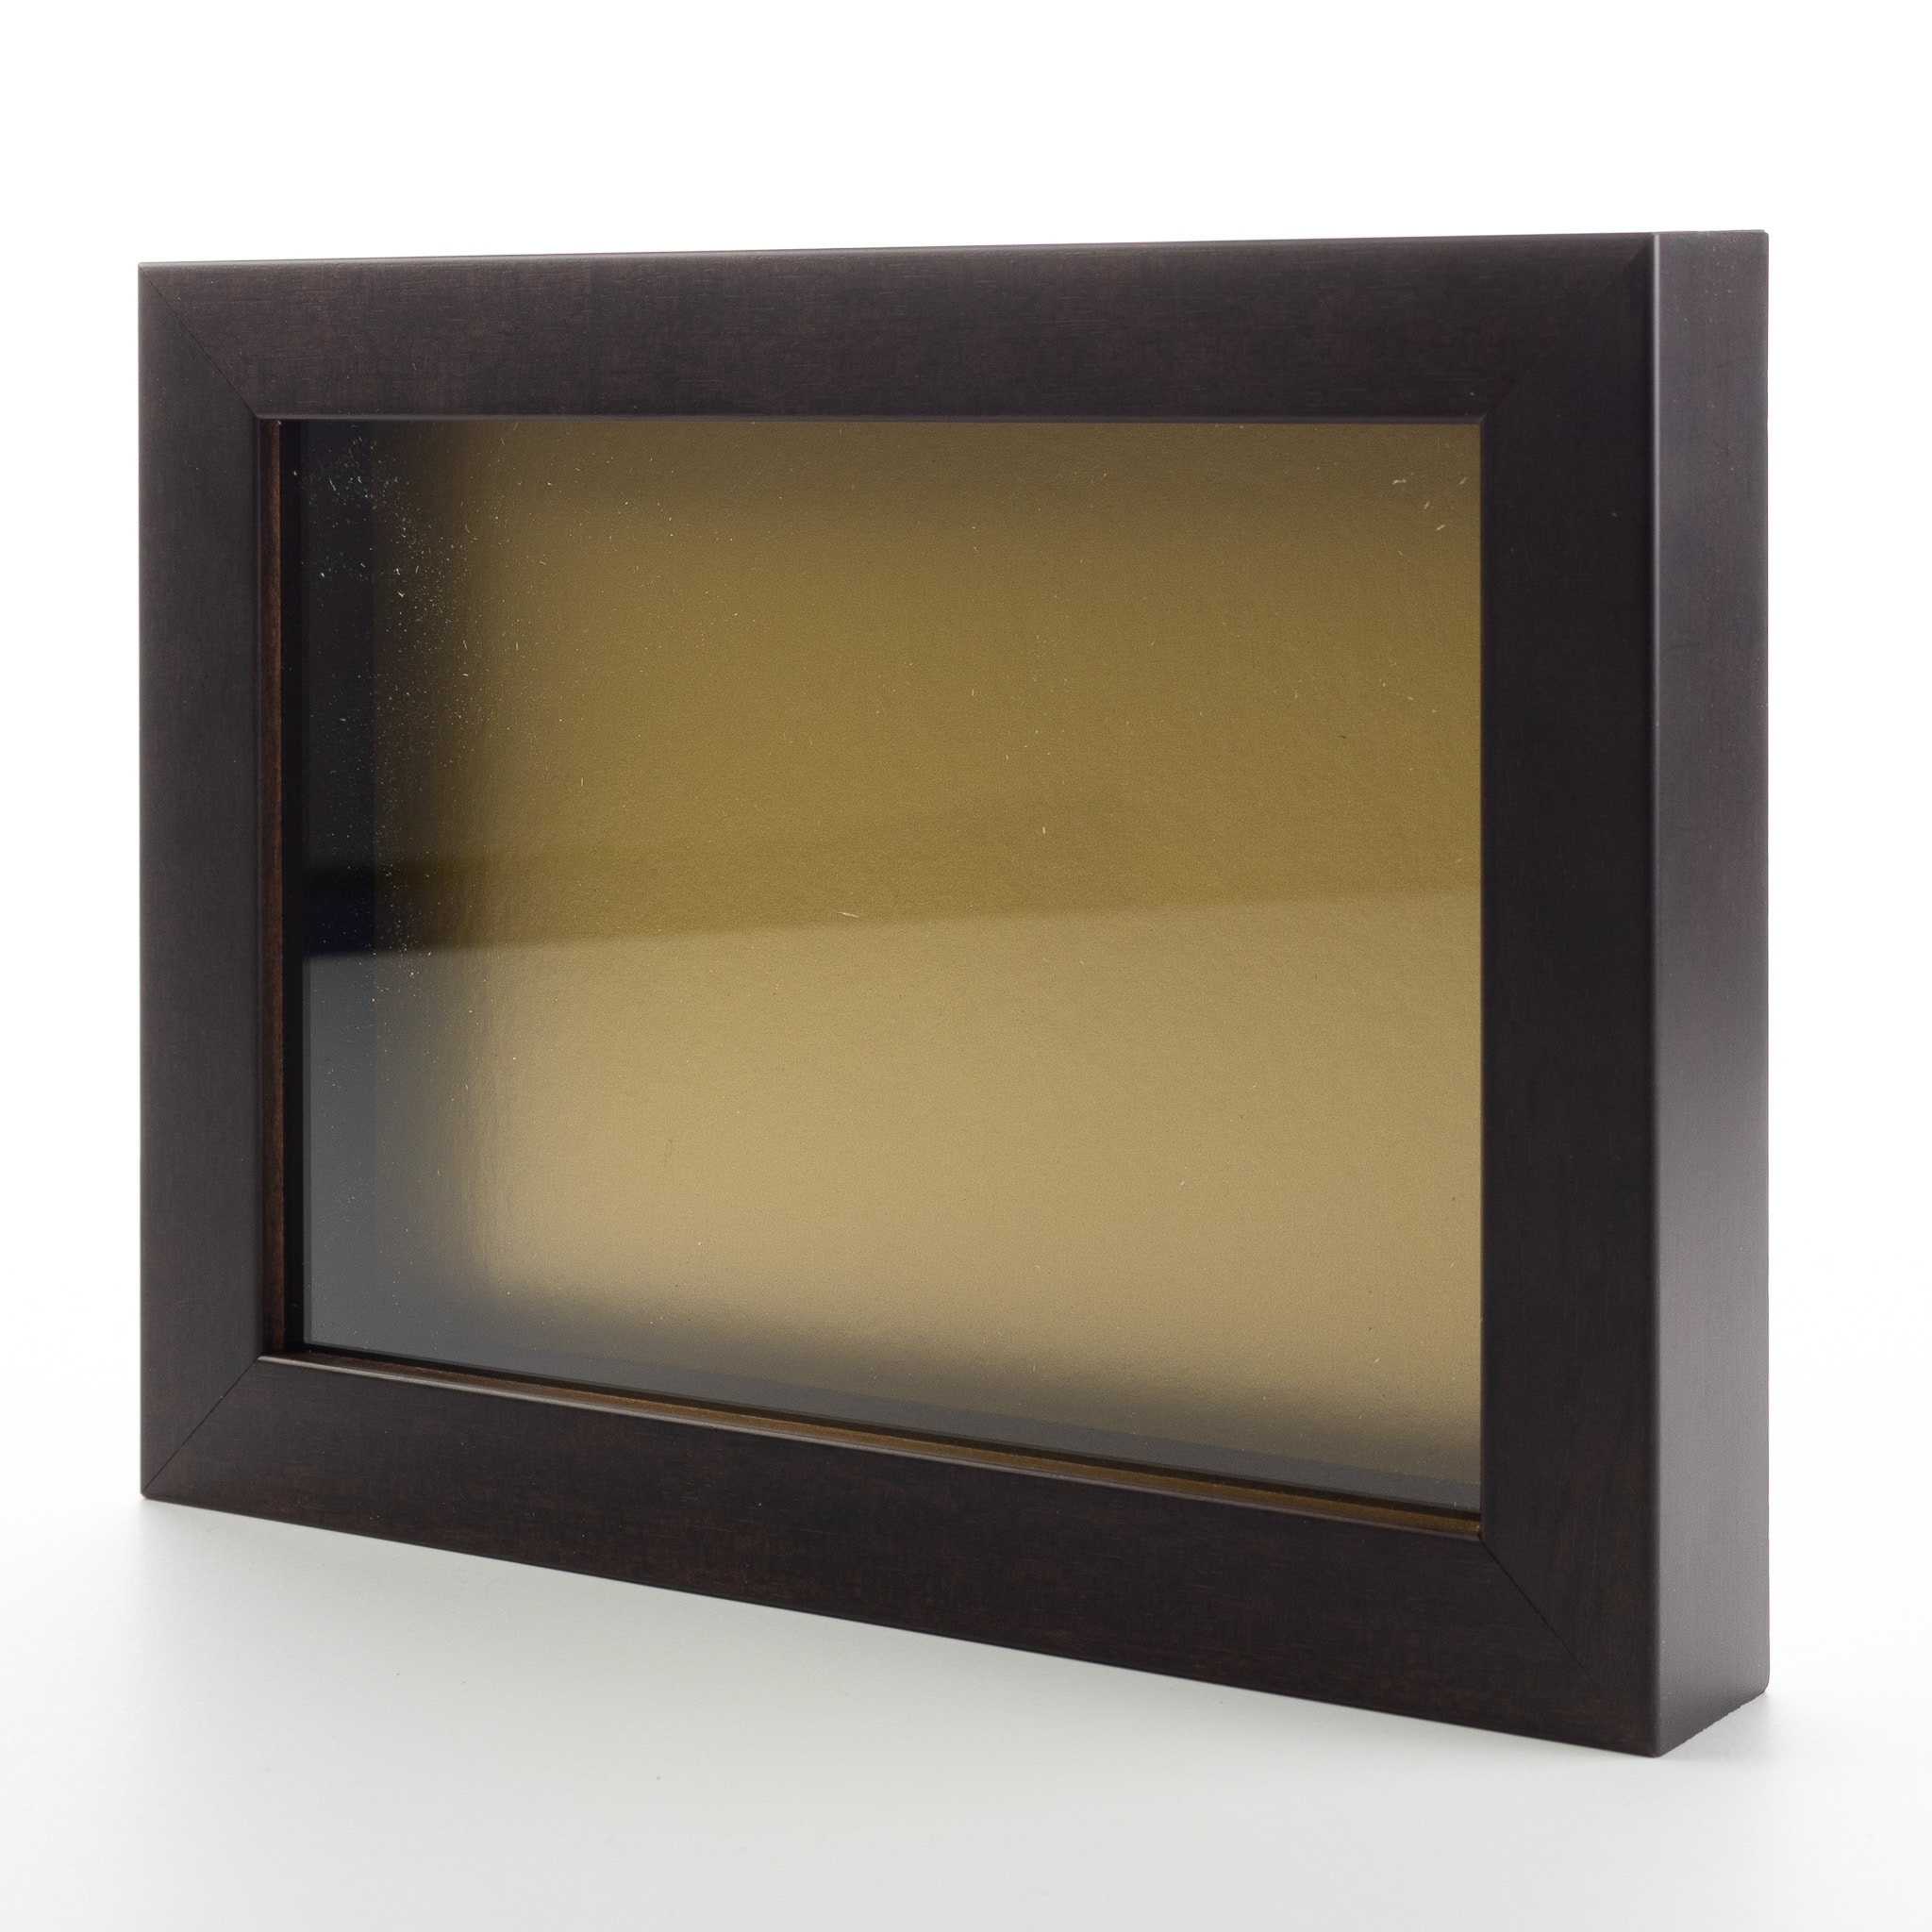 CustomPictureFrames.com 8x8 Shadow Box Frame Painted White Real Wood with A Blue Acid-Free Backing | 3/4 of Usuable Depth | UV Resistant Acrylic